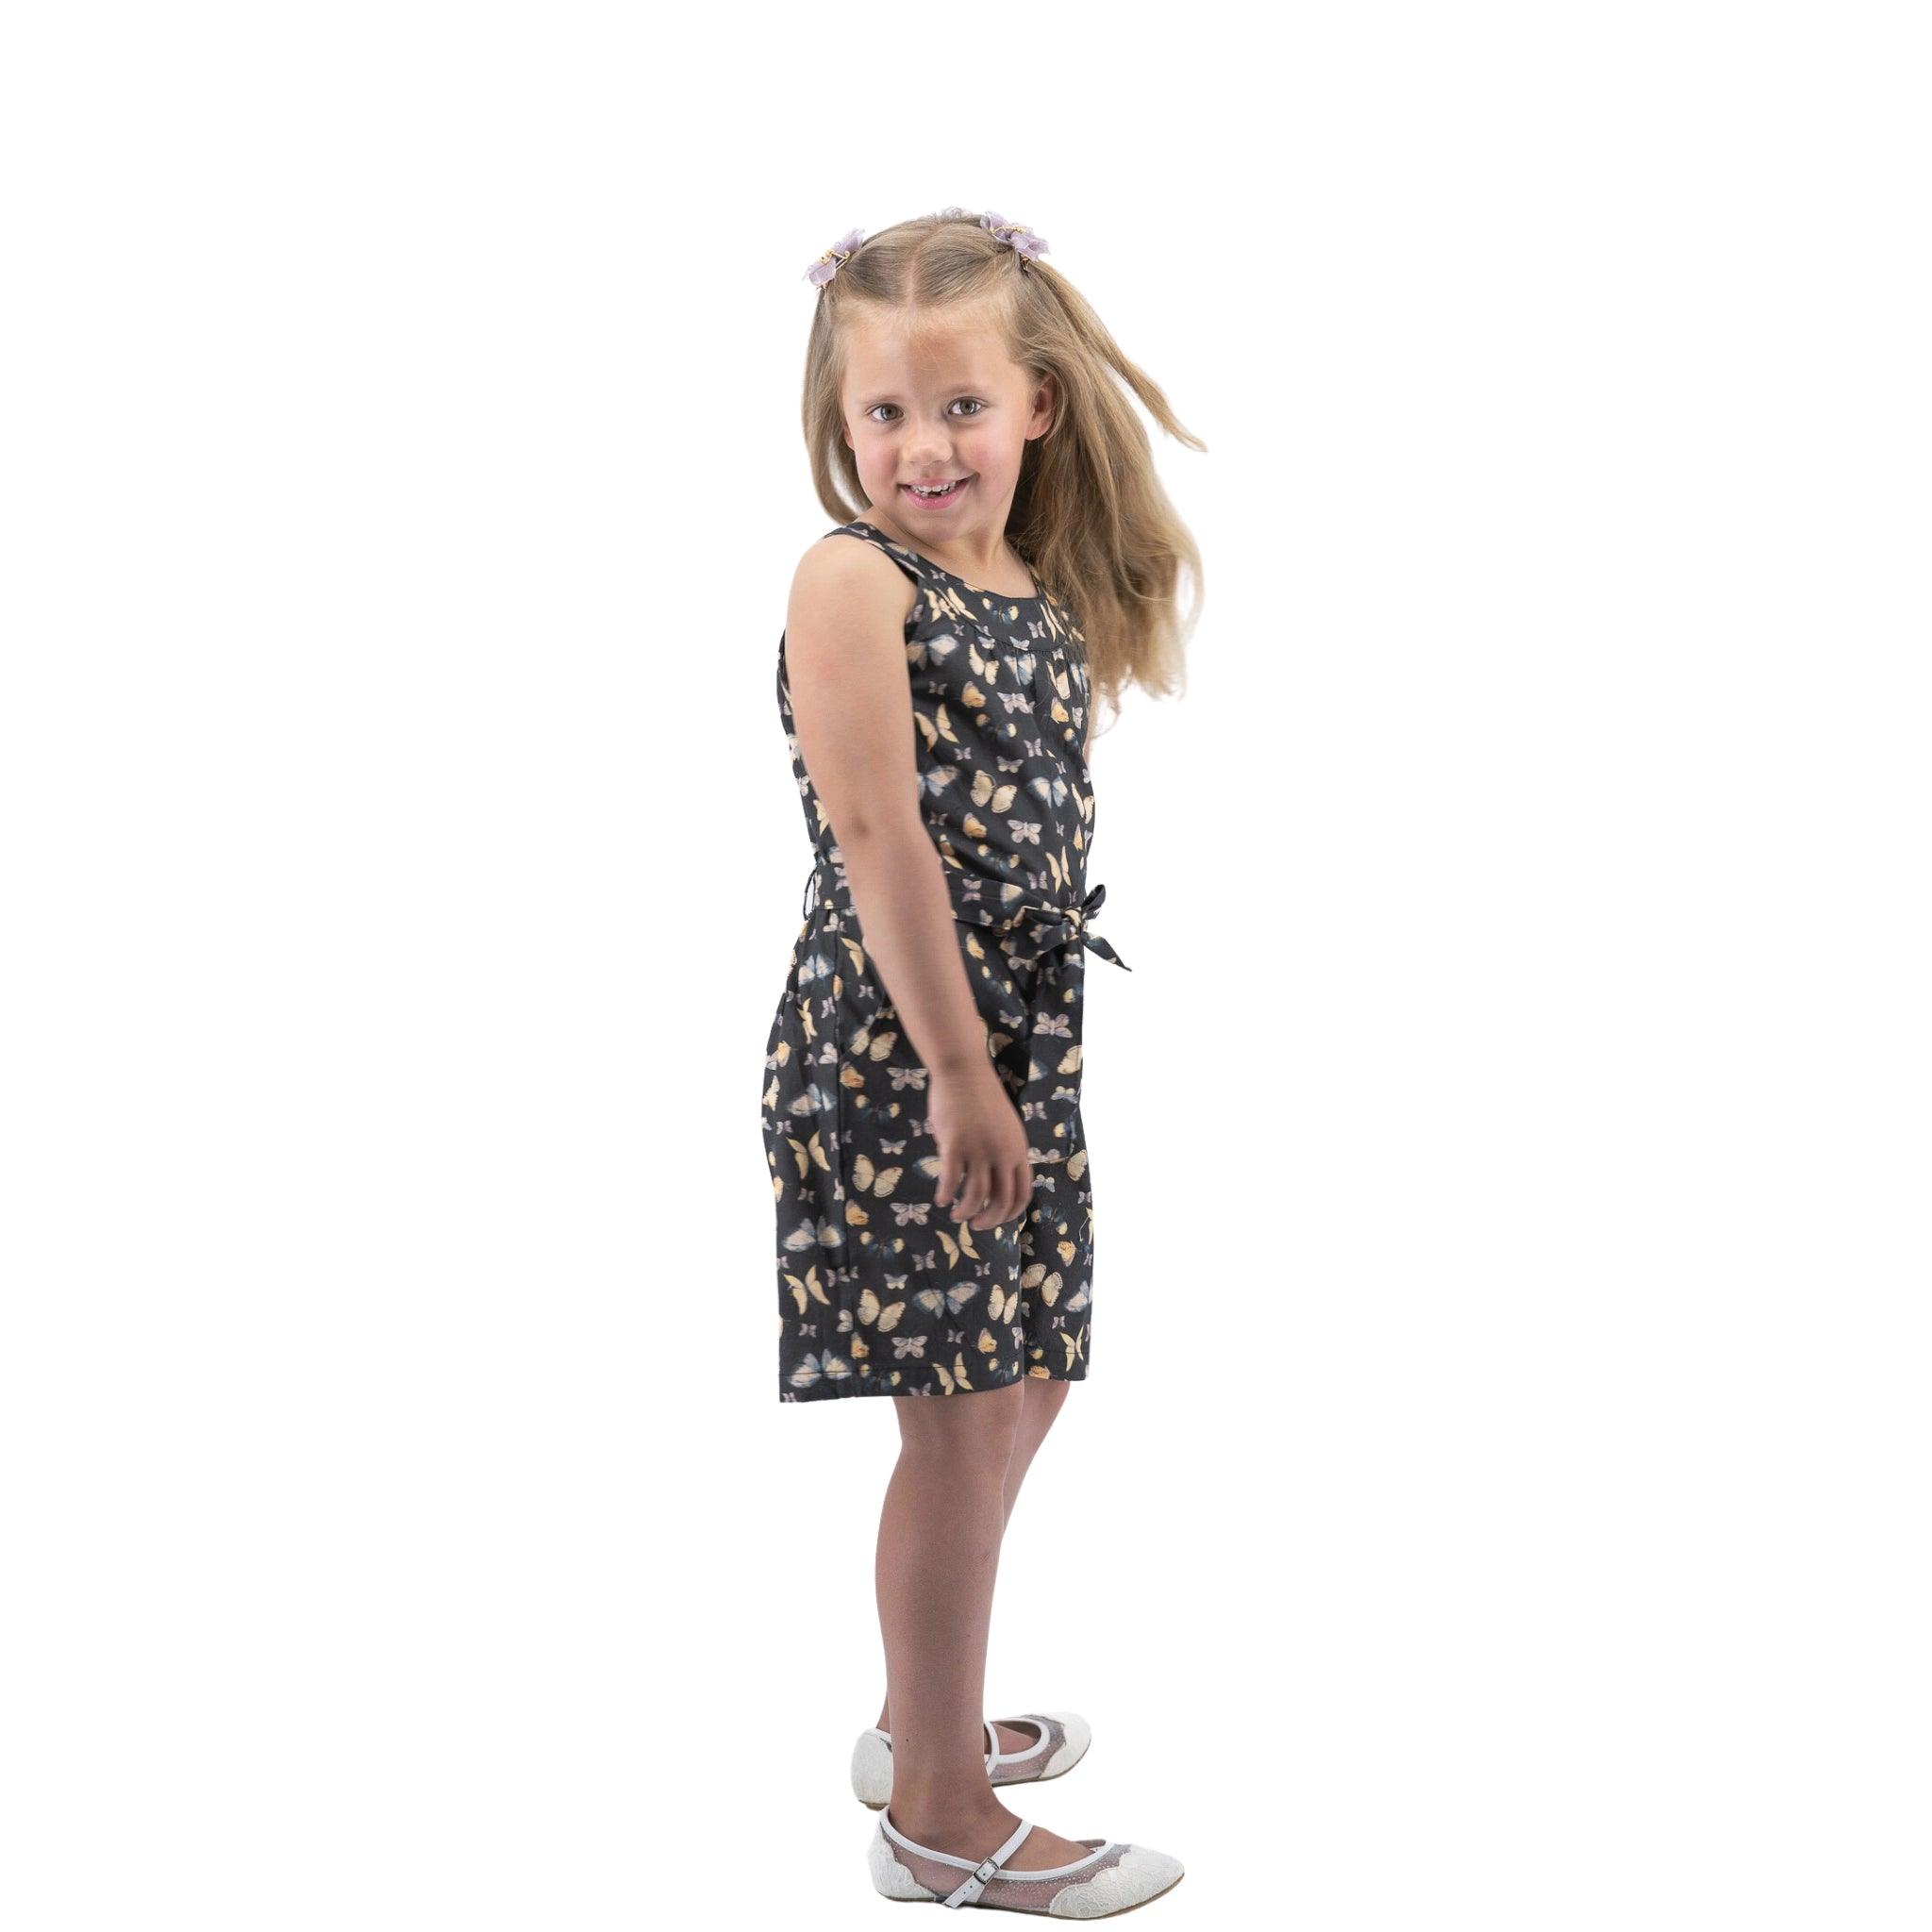 Young girl in a sleeveless floral dress and white shoes smiling over her shoulder, standing against a white background wearing the Karee Pirate Black Adventure-ready Cotton Play Suit.